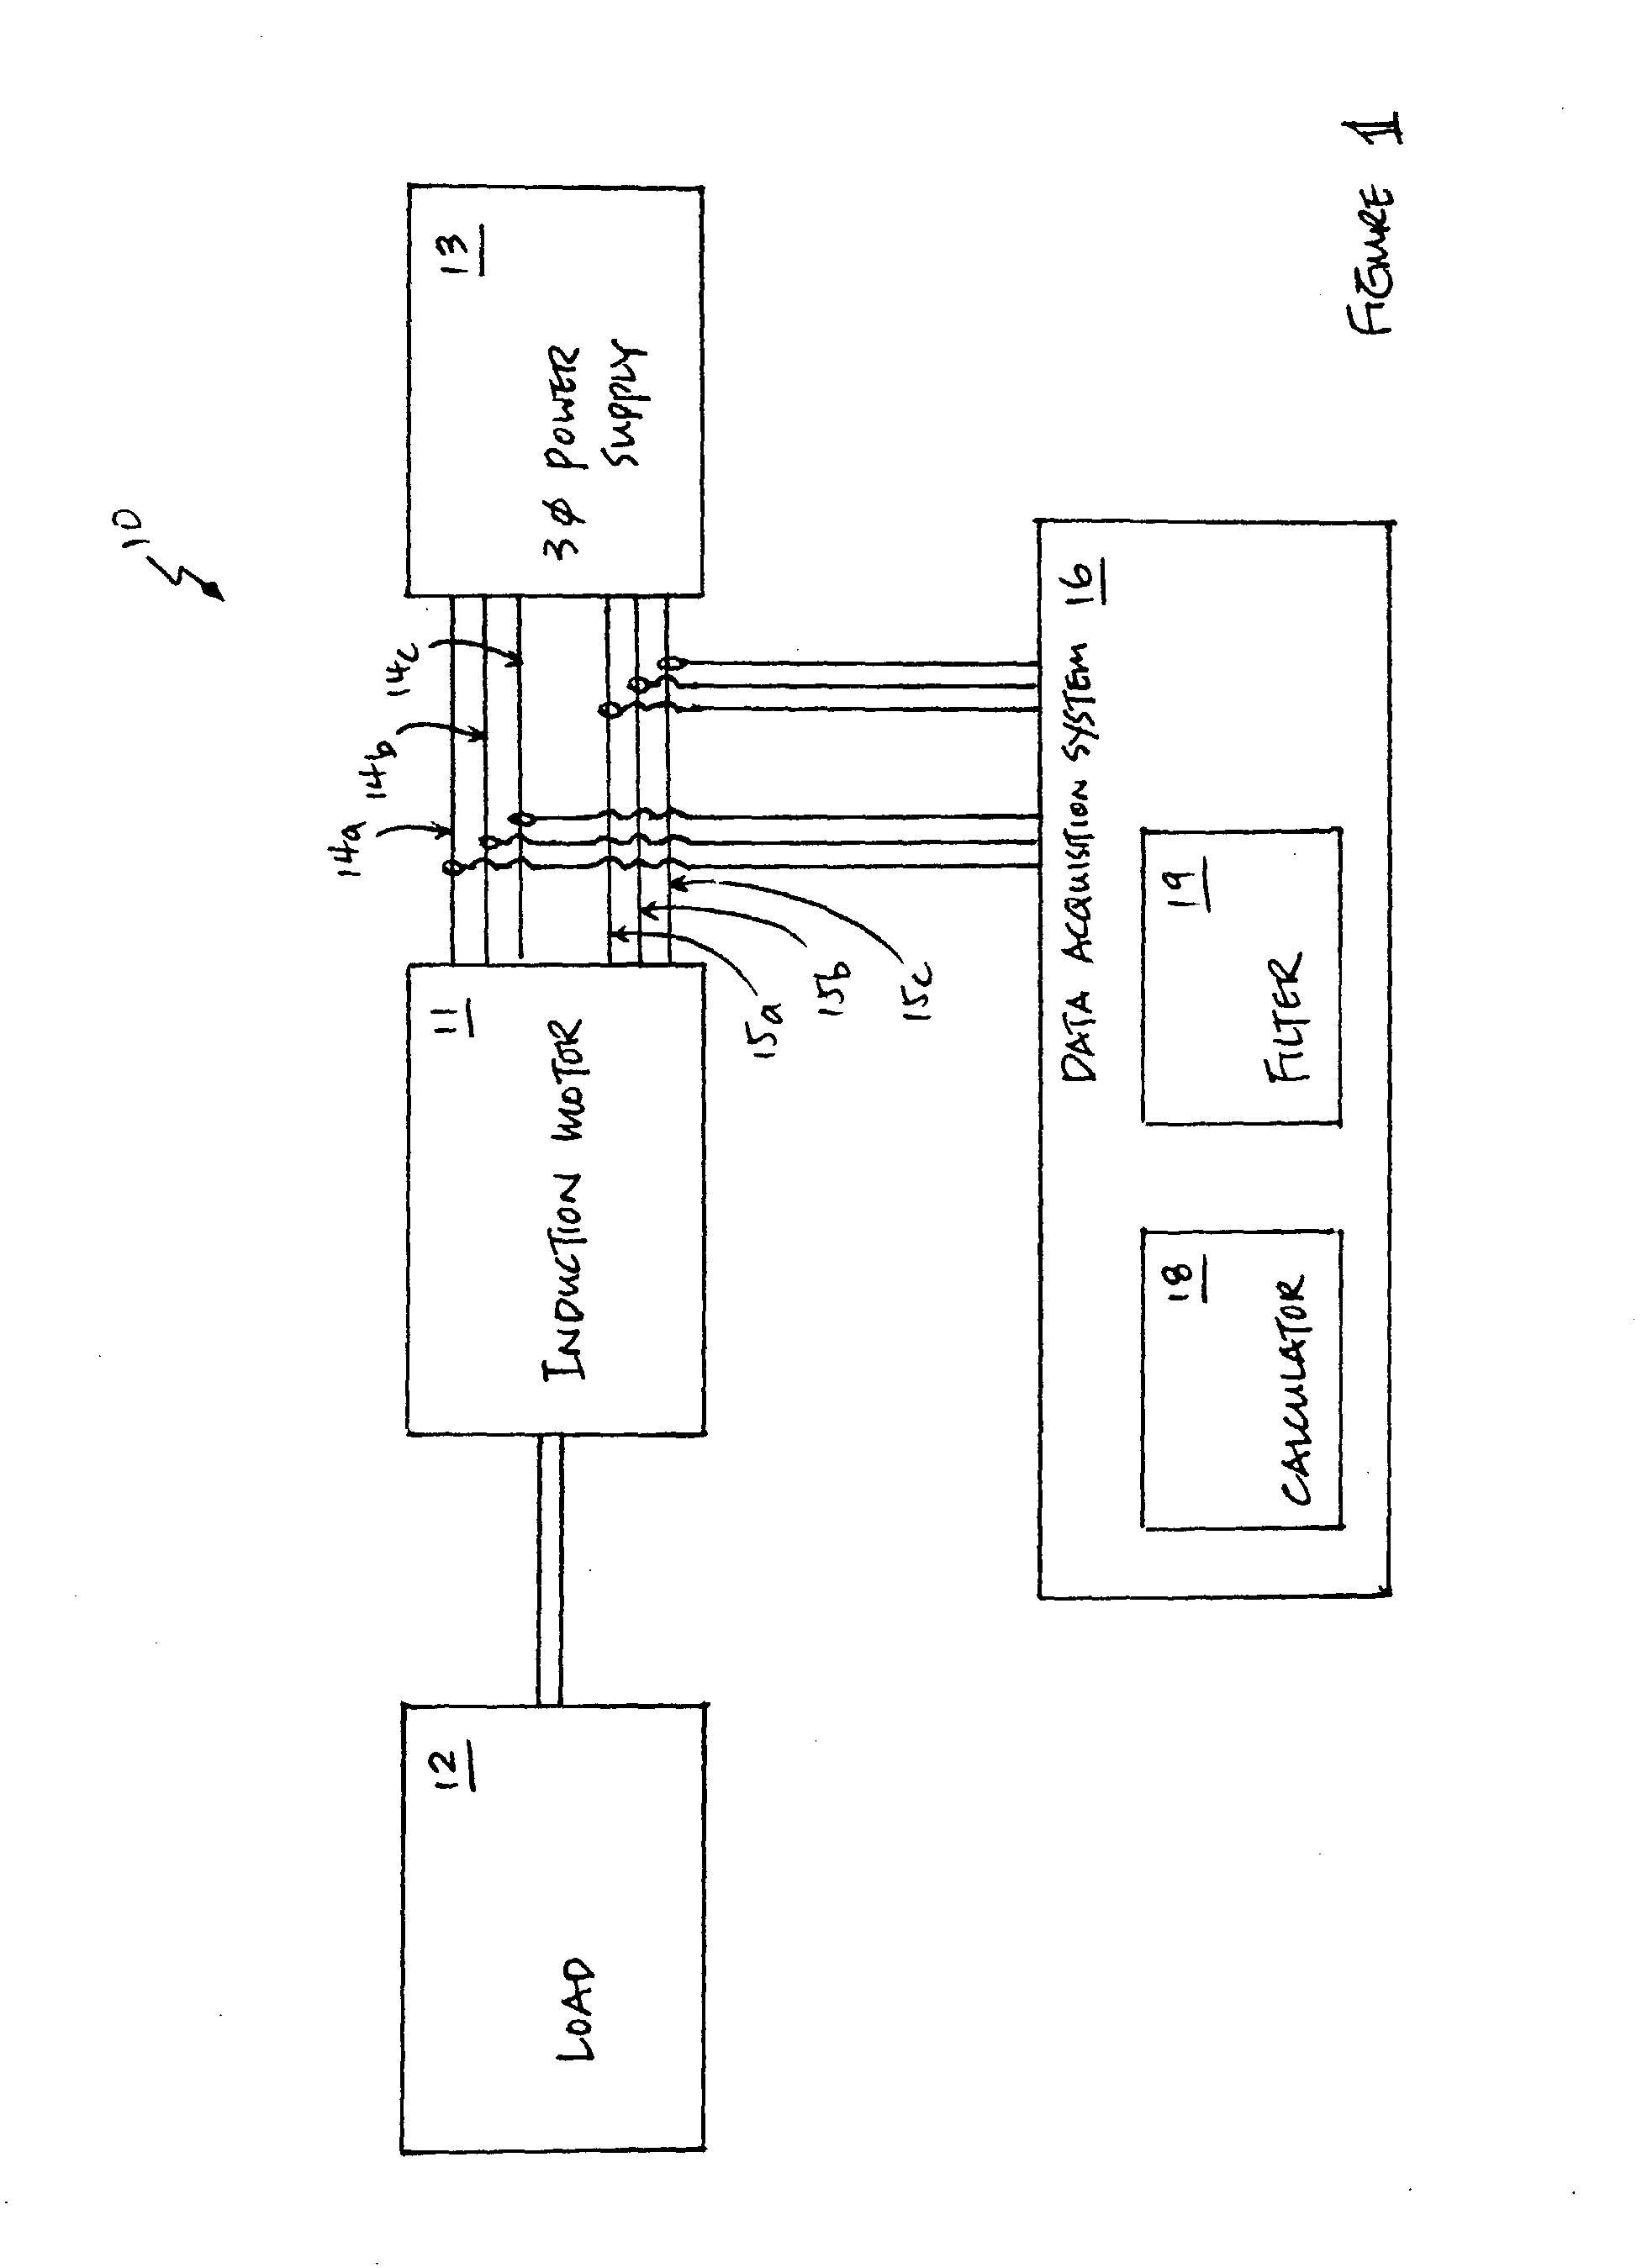 Method and system for determining induction motor speed